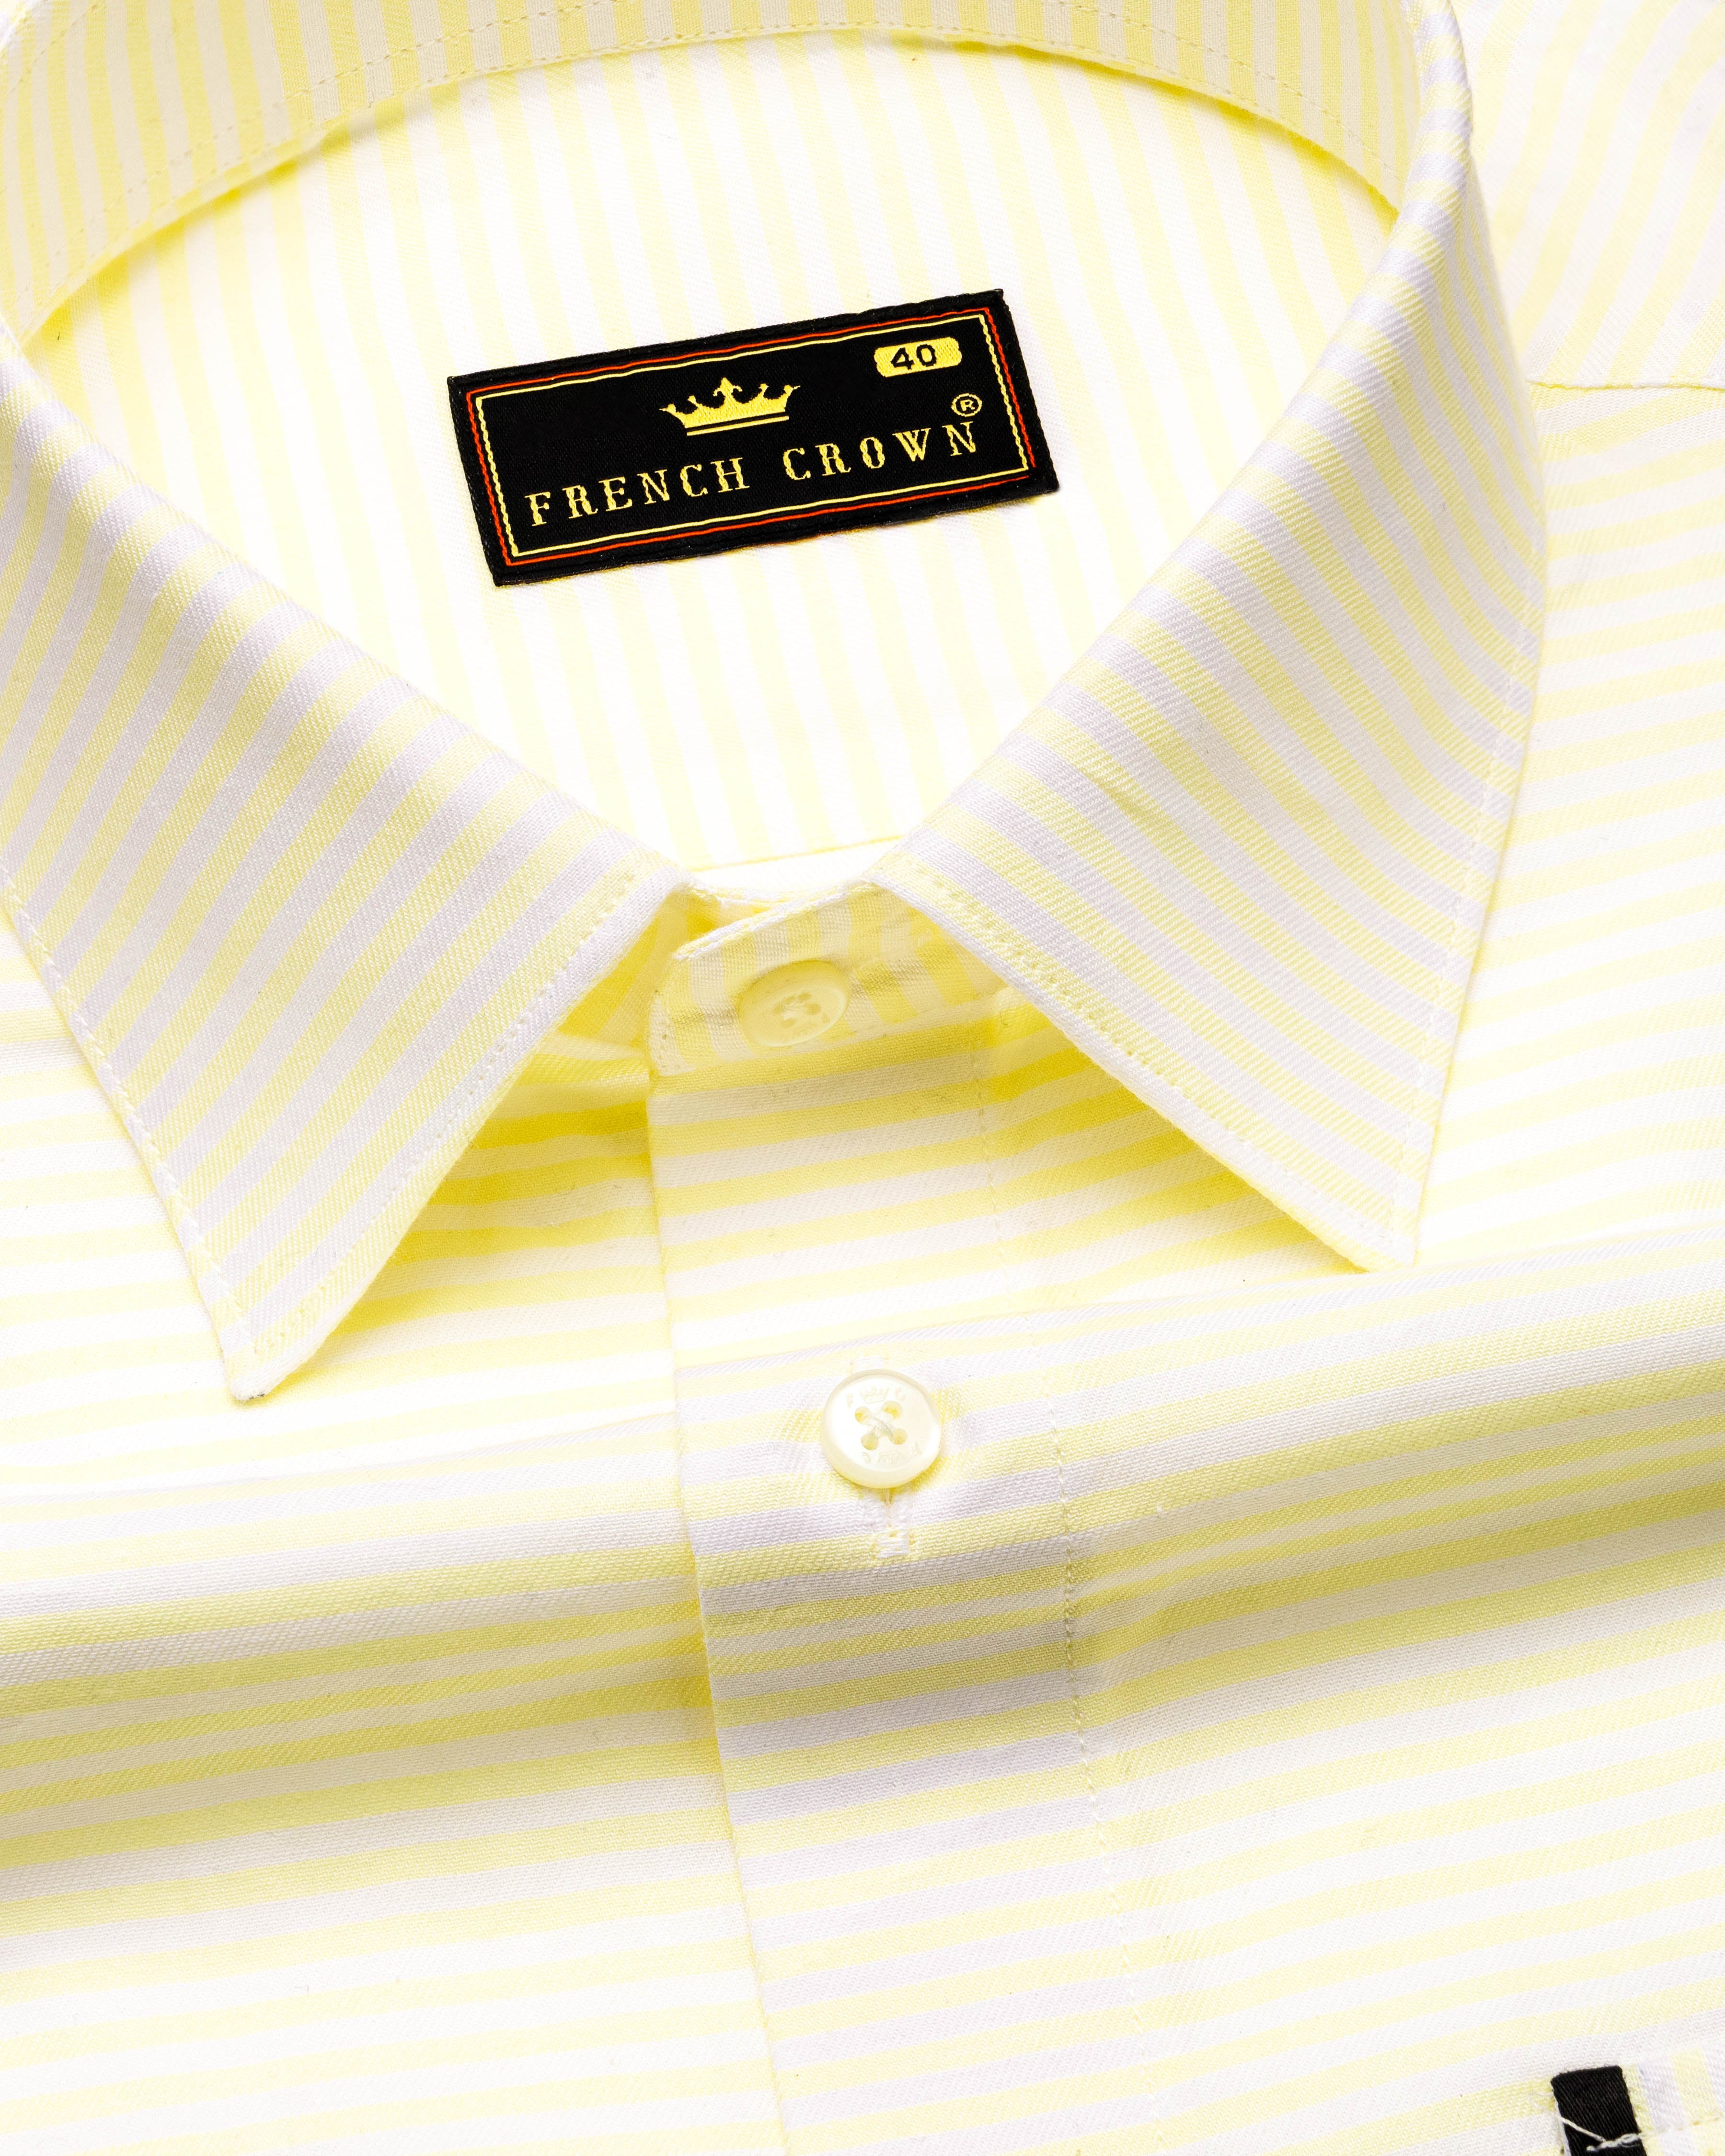 Oasis Yellow and White Striped with Black Piping Work Twill Premium Cotton Shirt 9539-D21-38, 9539-D21-H-38, 9539-D21-39, 9539-D21-H-39, 9539-D21-40, 9539-D21-H-40, 9539-D21-42, 9539-D21-H-42, 9539-D21-44, 9539-D21-H-44, 9539-D21-46, 9539-D21-H-46, 9539-D21-48, 9539-D21-H-48, 9539-D21-50, 9539-D21-H-50, 9539-D21-52, 9539-D21-H-52